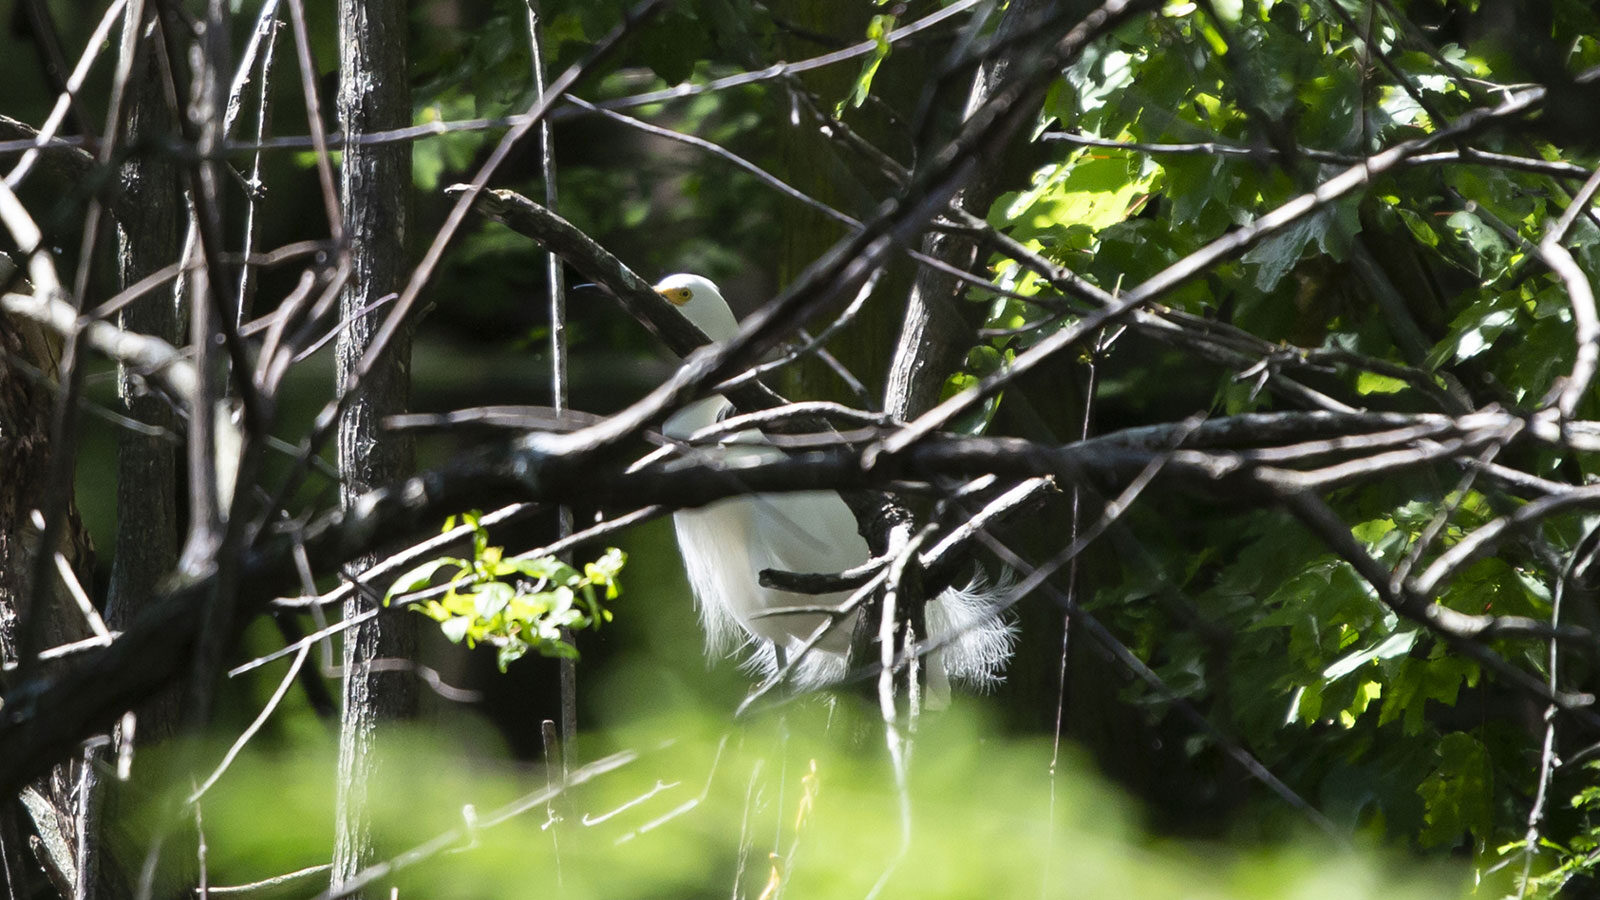 Snowy egret perched on a tree branch behind bramble